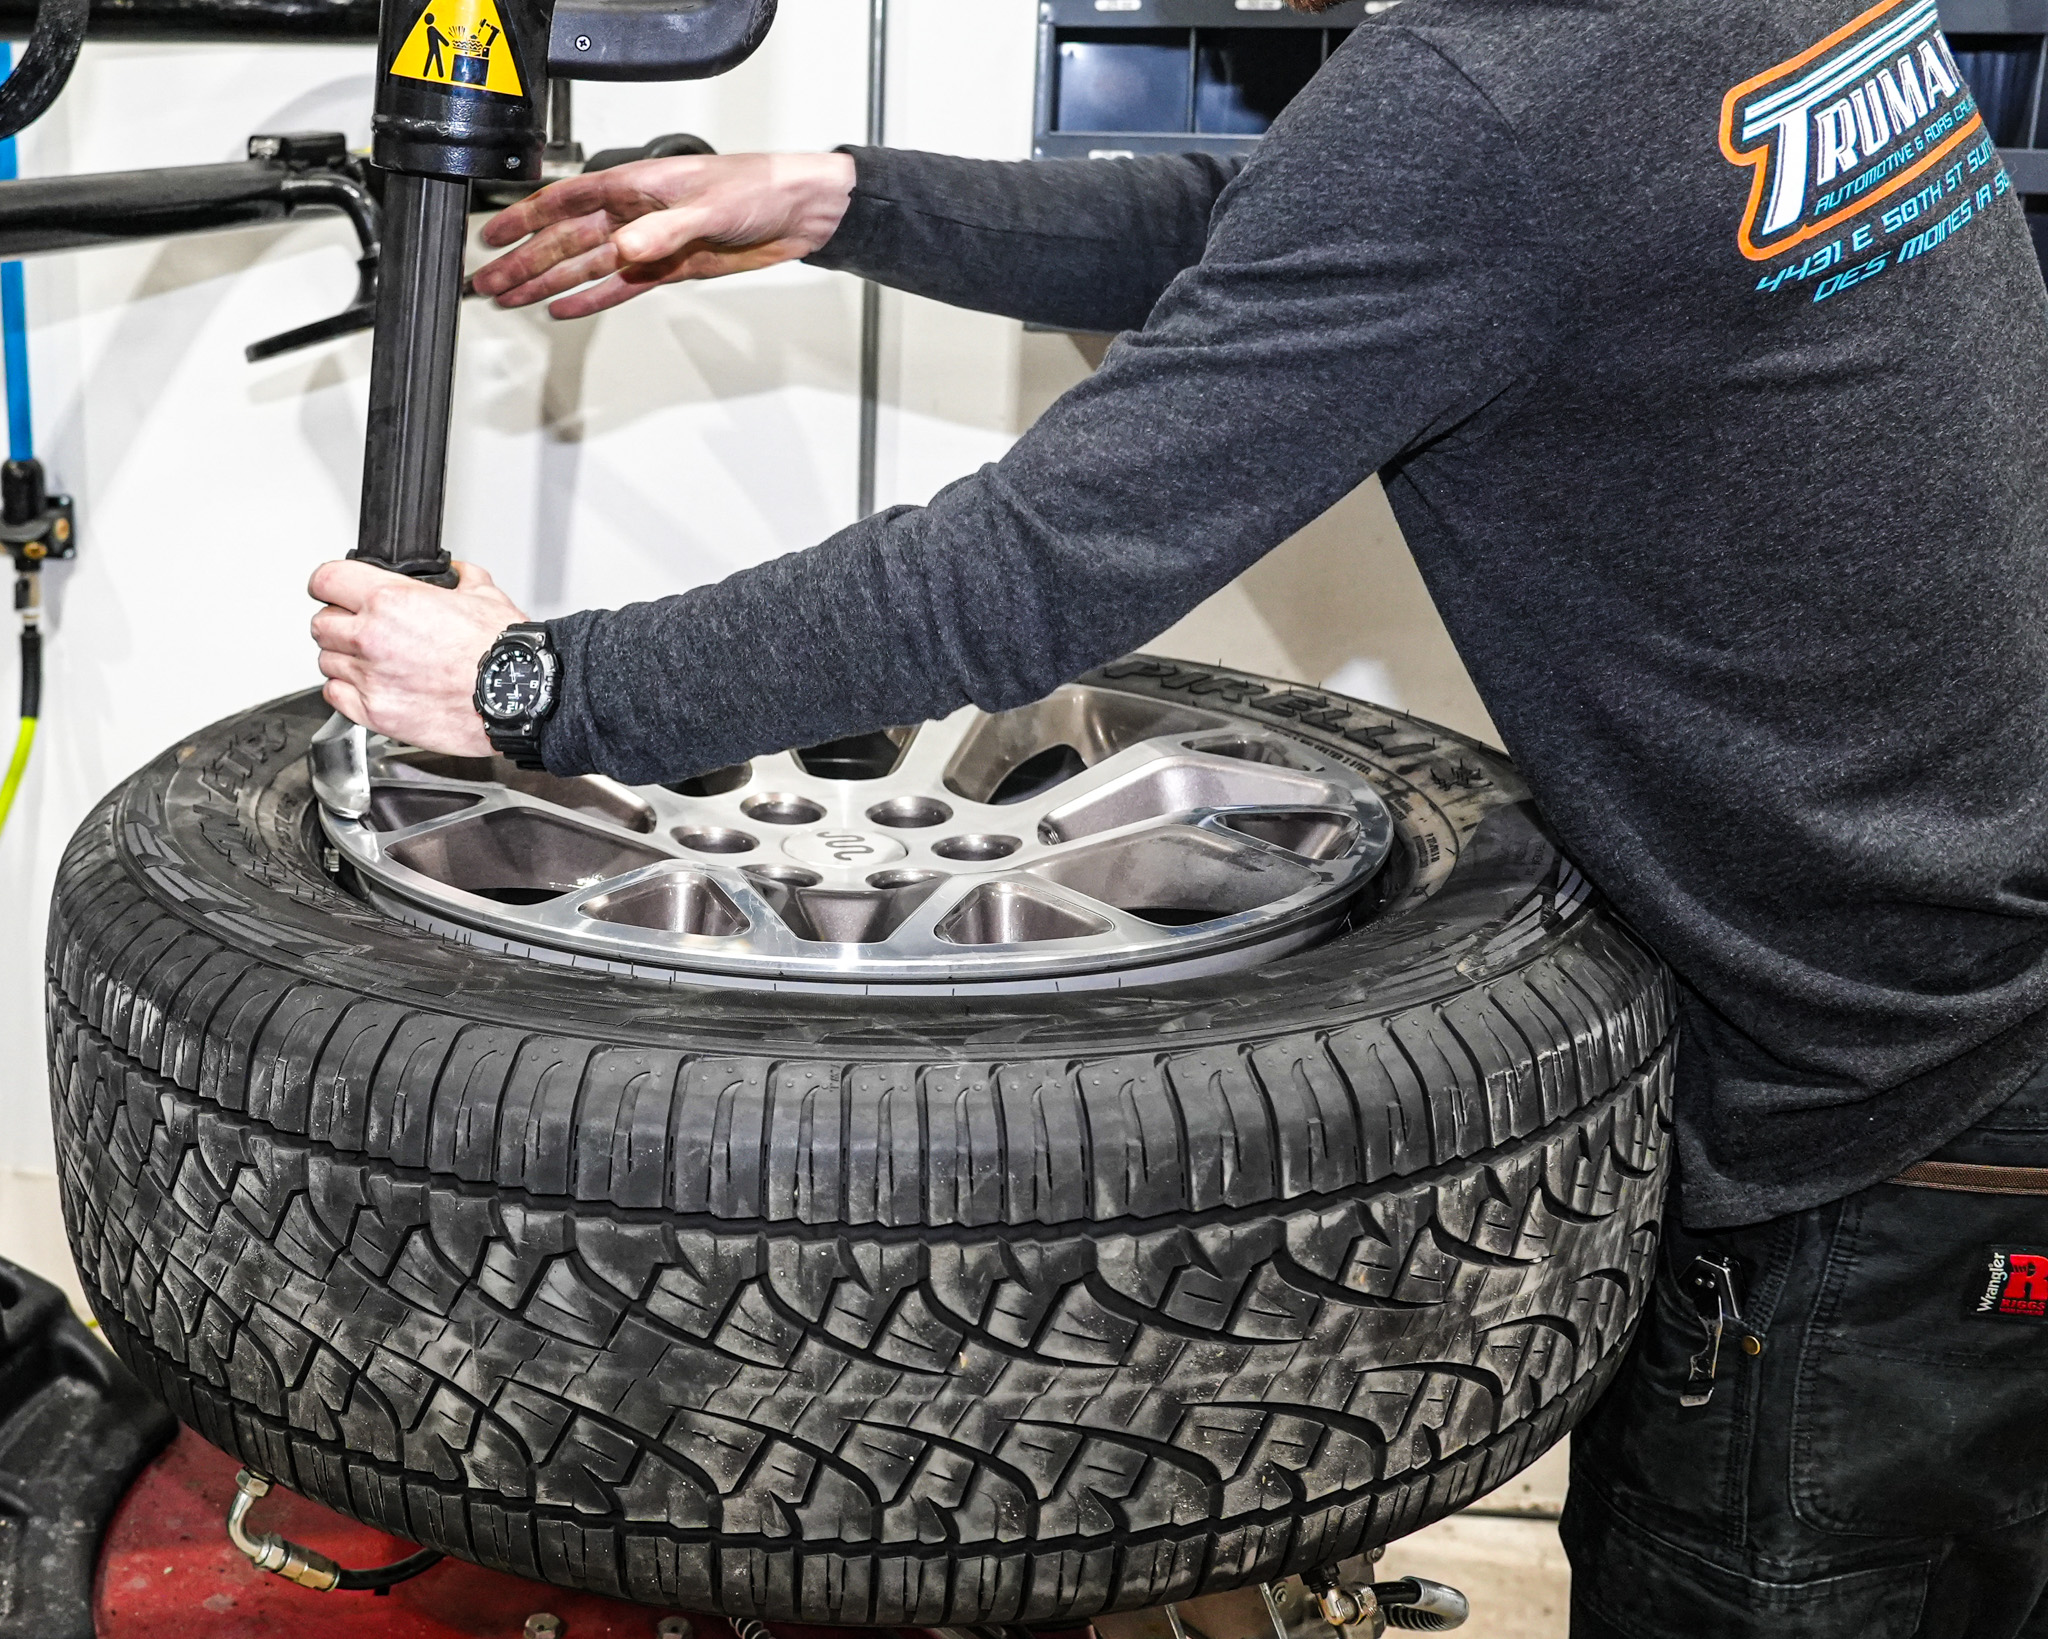 Tire Maintenance Tips to Keep You Safe on the Road